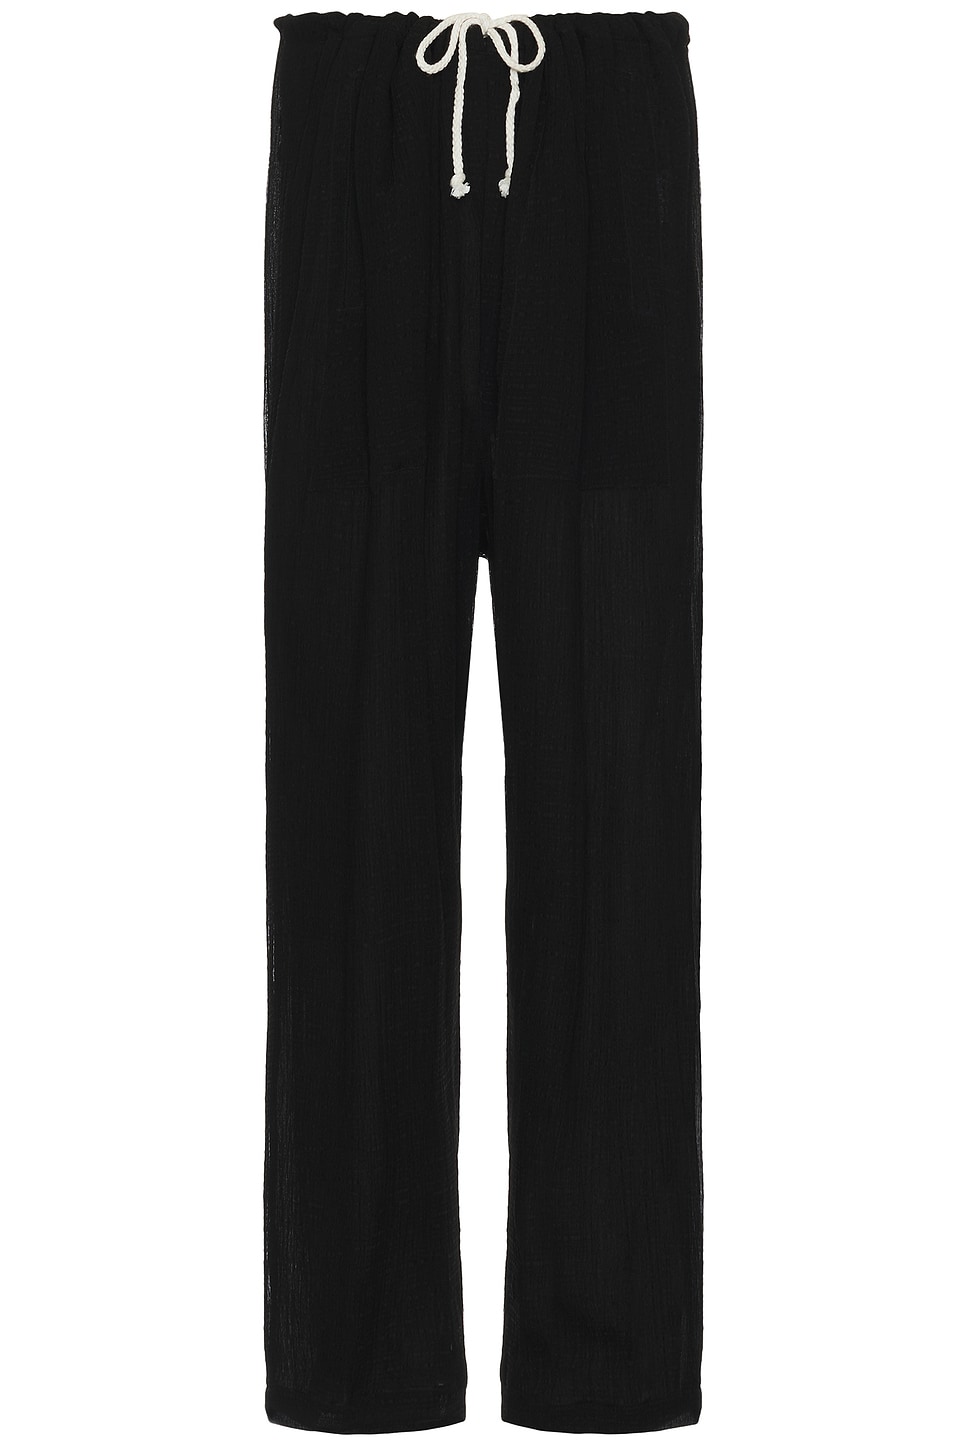 Image 1 of Connor McKnight Crinkle Pajama Pant in Black